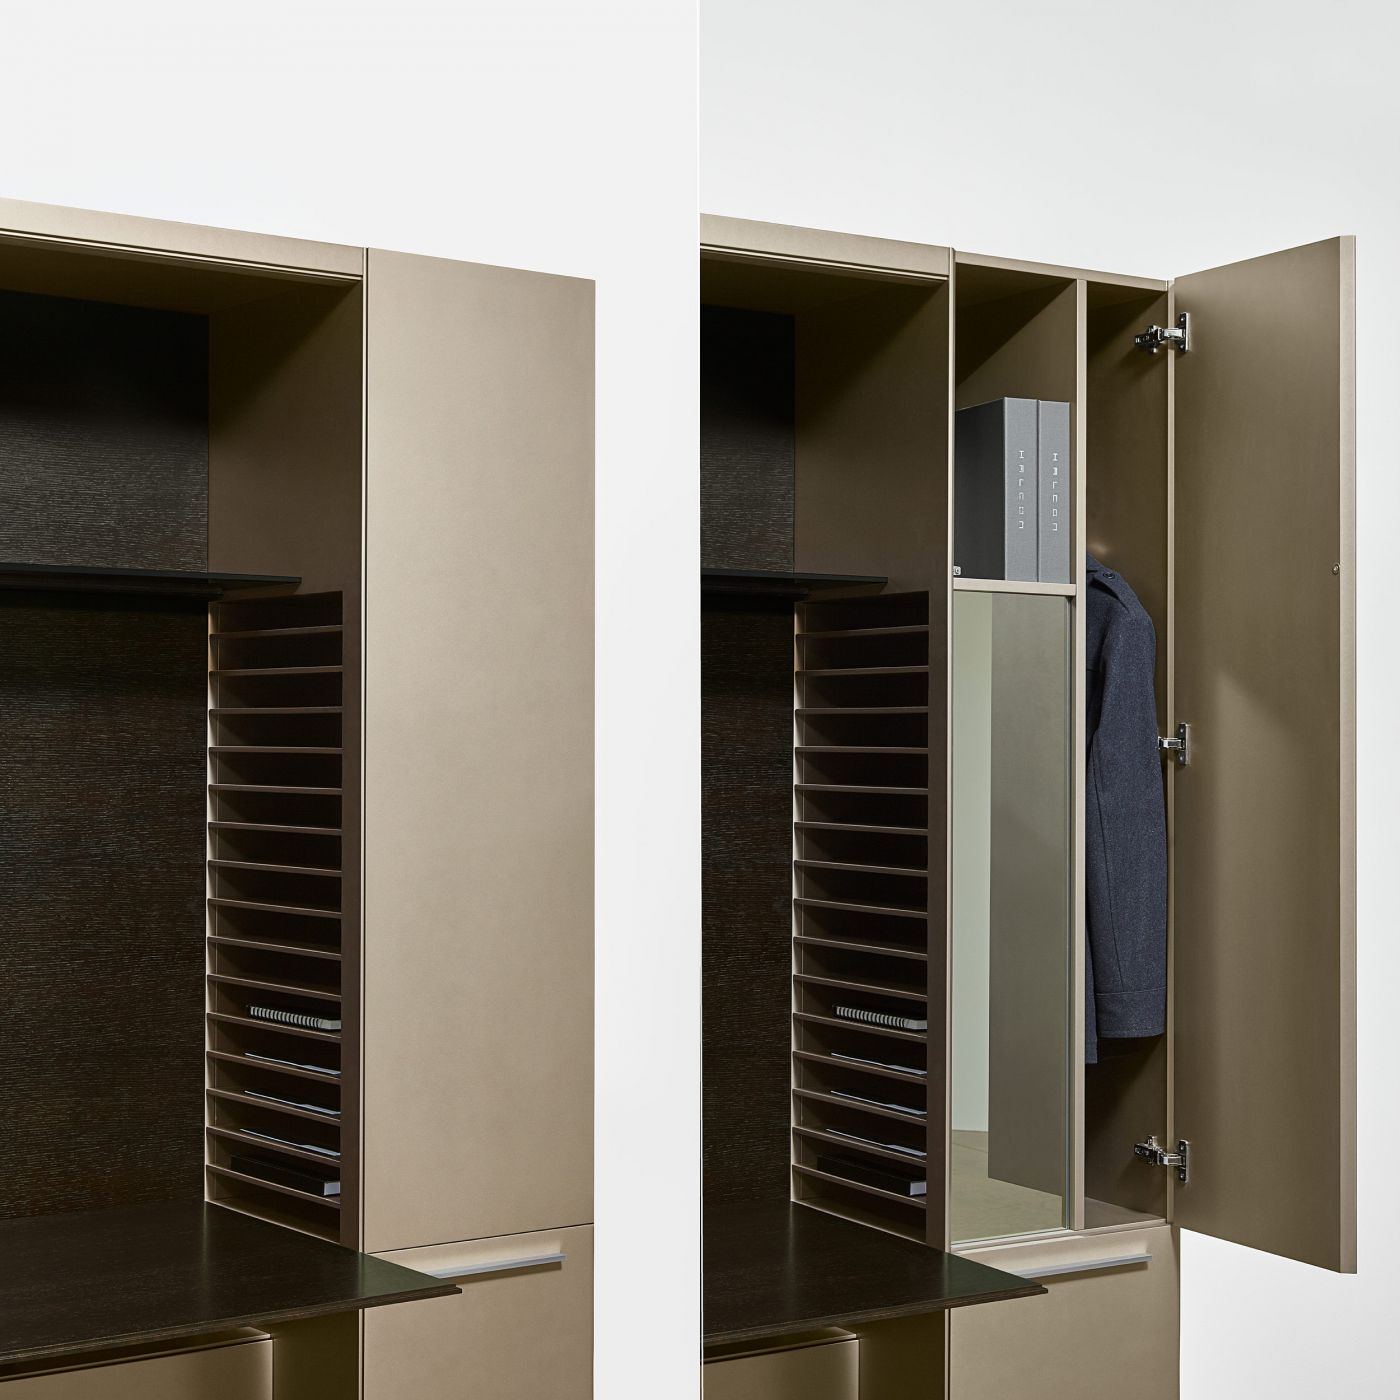 Ultra-efficient storage with discreet project filing, wardrobe, and mirror.